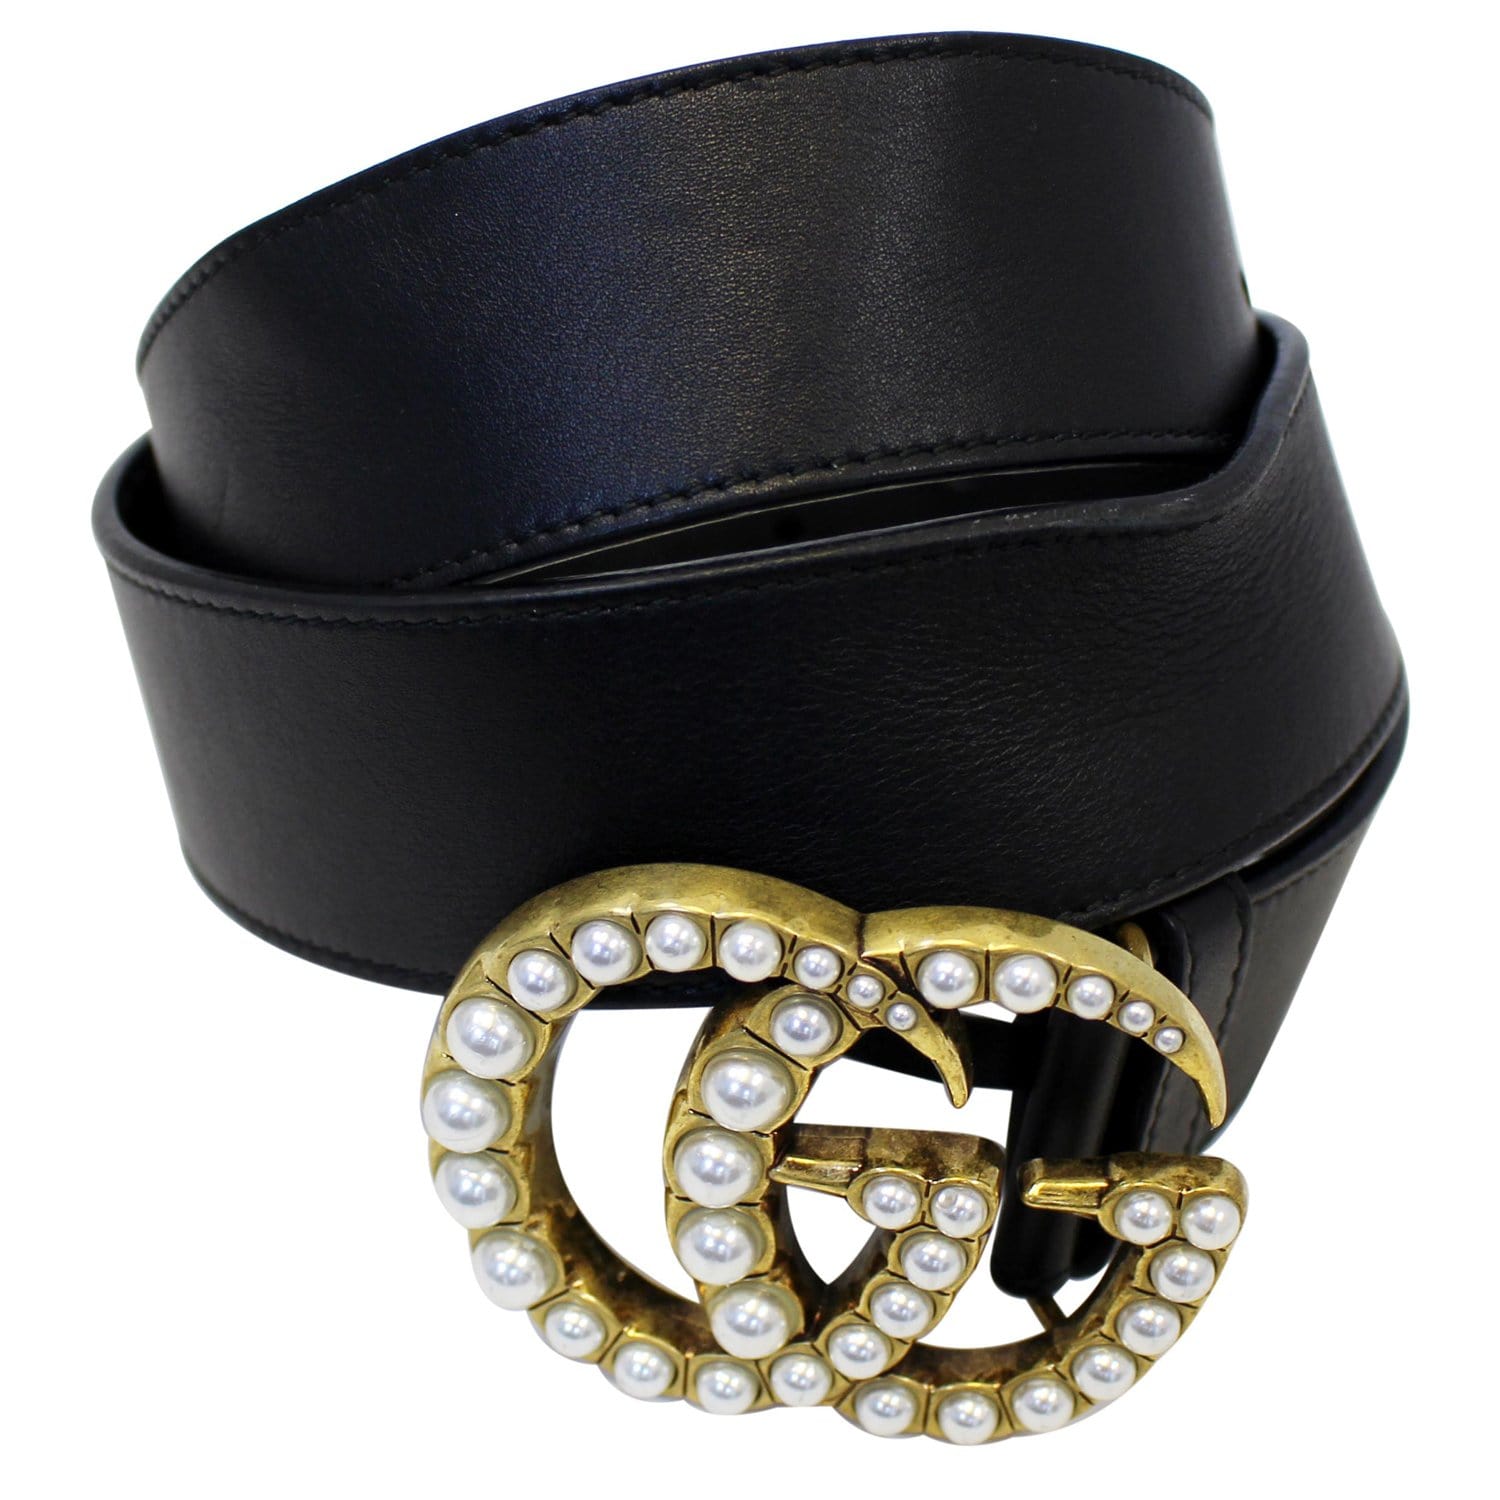 pearl double g gucci belt